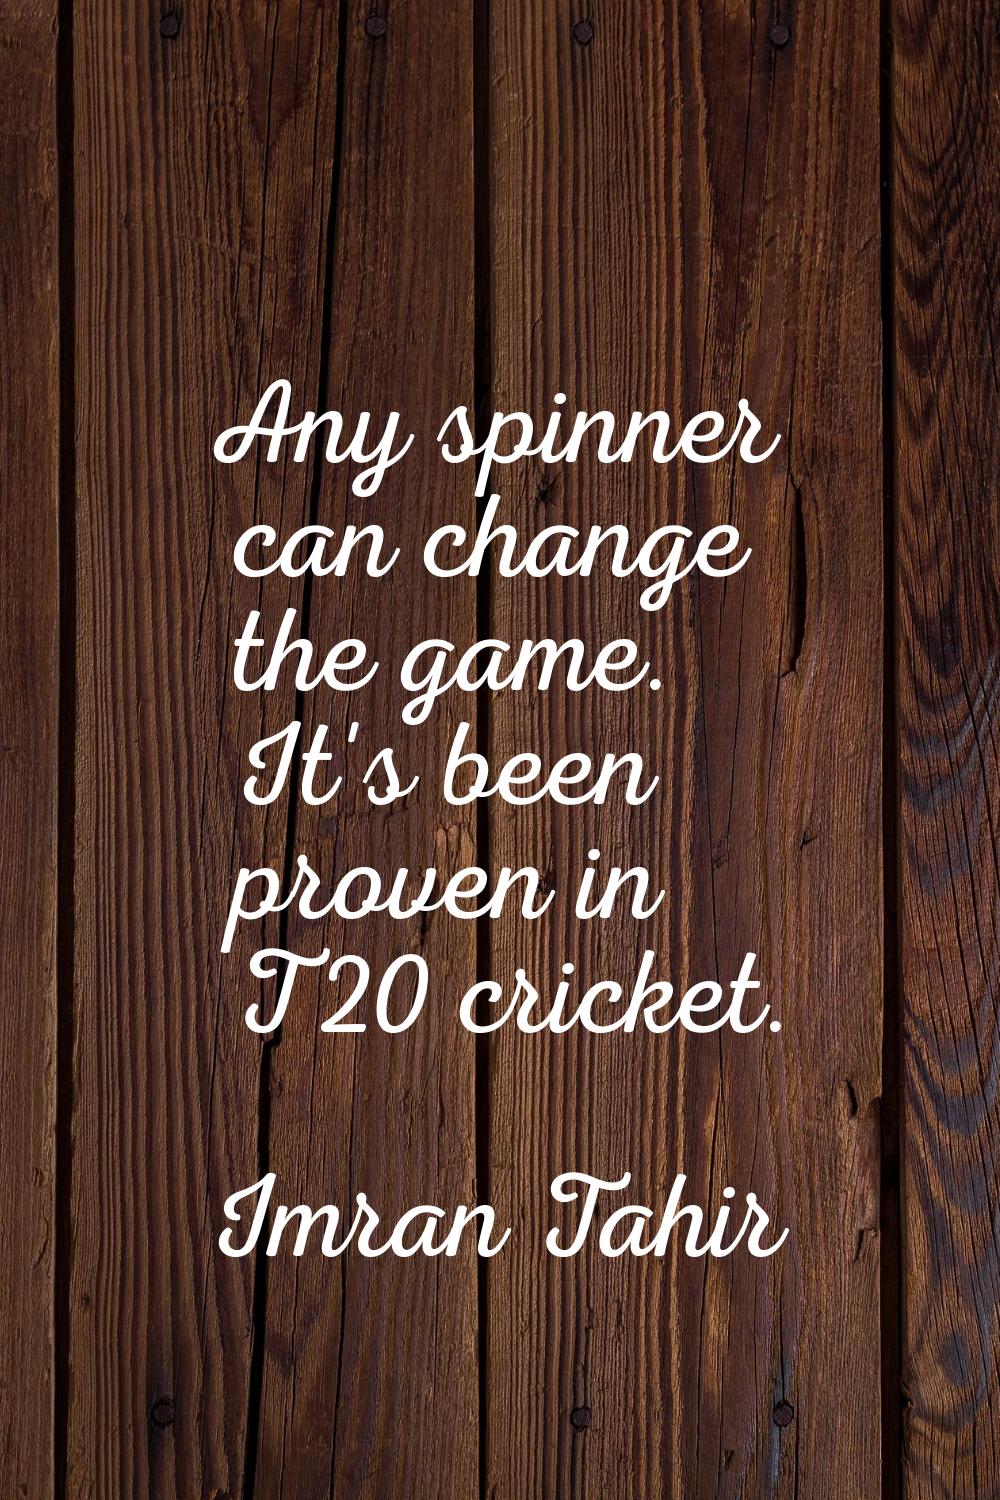 Any spinner can change the game. It's been proven in T20 cricket.